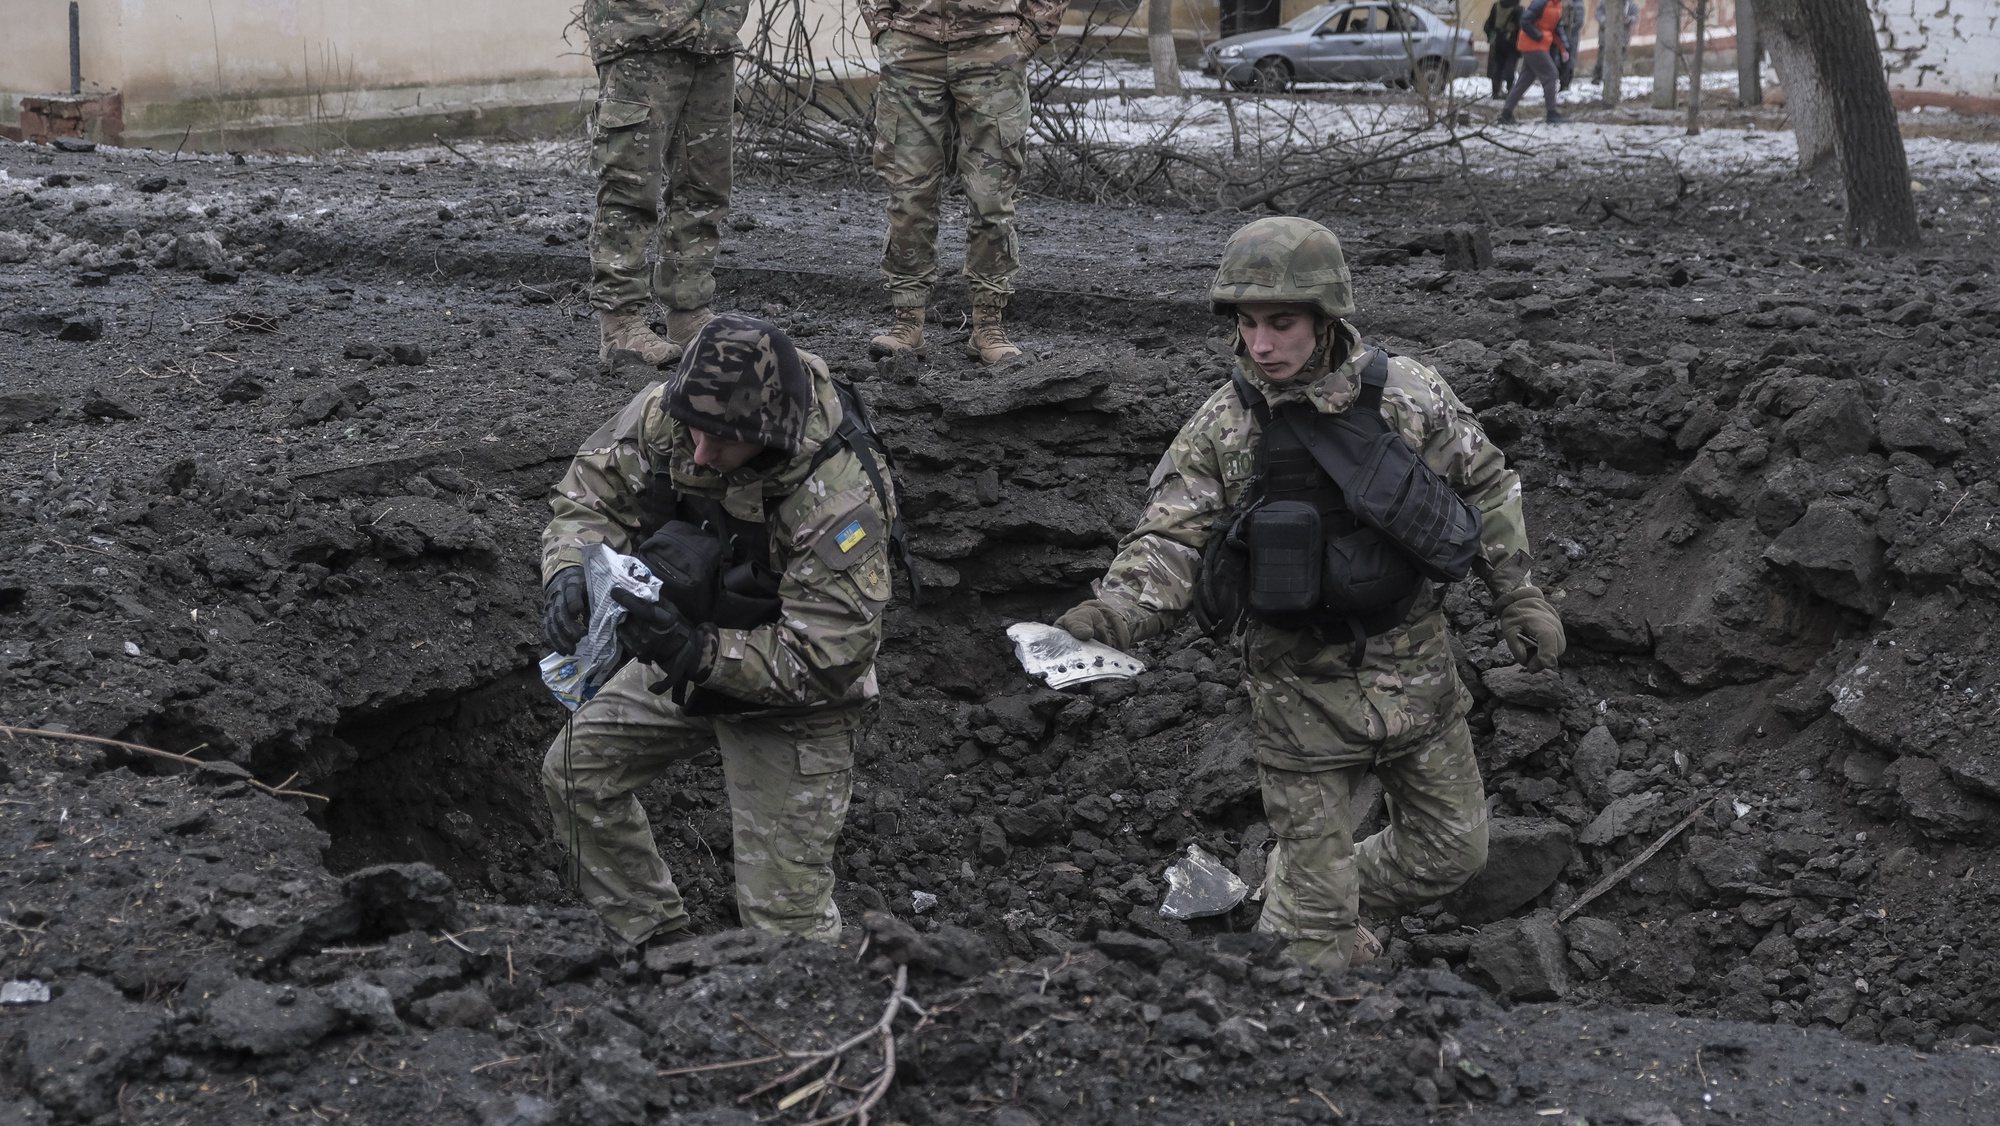 epa10444412 Ukrainian servicemen inspect a shell crater after a rocket attack on a residential area in Kramatorsk, Donetsk region, eastern Ukraine, 02 February 2023, amid Russia&#039;s invasion. At least five people were injured after two rockets hit on the day a residential area in Kramatorsk, the head of Ukraine&#039;s Donetsk Regional Military Administration, Pavlo Kyrylenko said in a statement. The rockets hit an area near the site of overnight shelling on a four-story residential building, where at least three people were killed and 18 others injured, according to the State Emergency Service of Ukraine (SES). Russian troops entered Ukraine territory on 24 February 2022 starting a conflict that has provoked destruction and a humanitarian crisis.  EPA/SERGEY SHESTAK